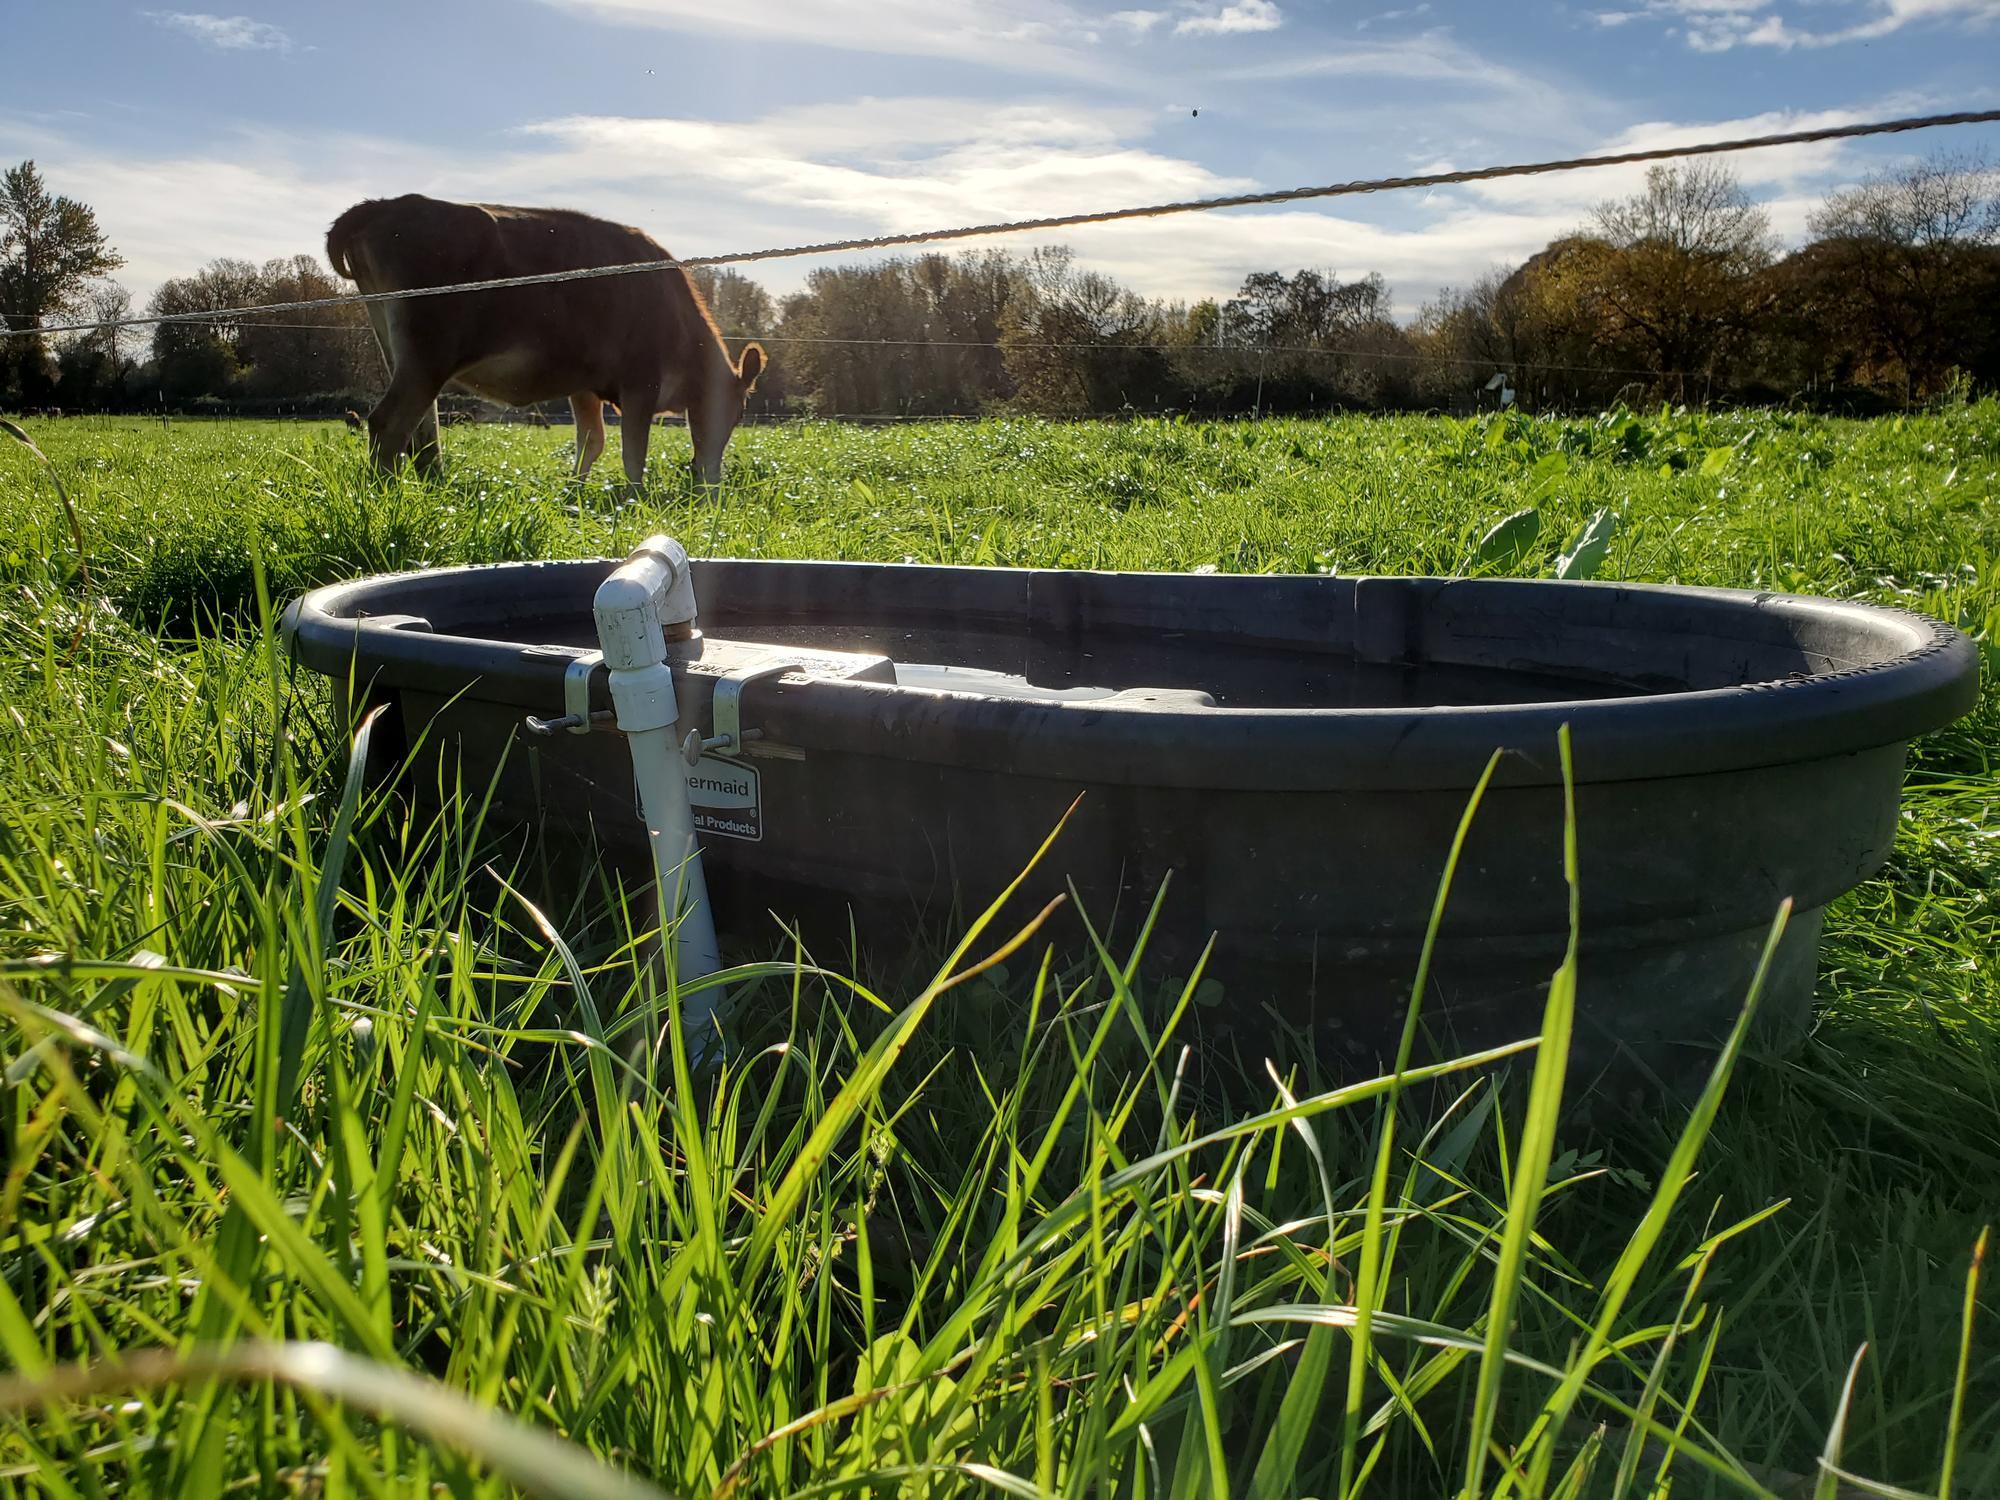 A dairy heifer grazes in a pasture with a water trough in the foreground.